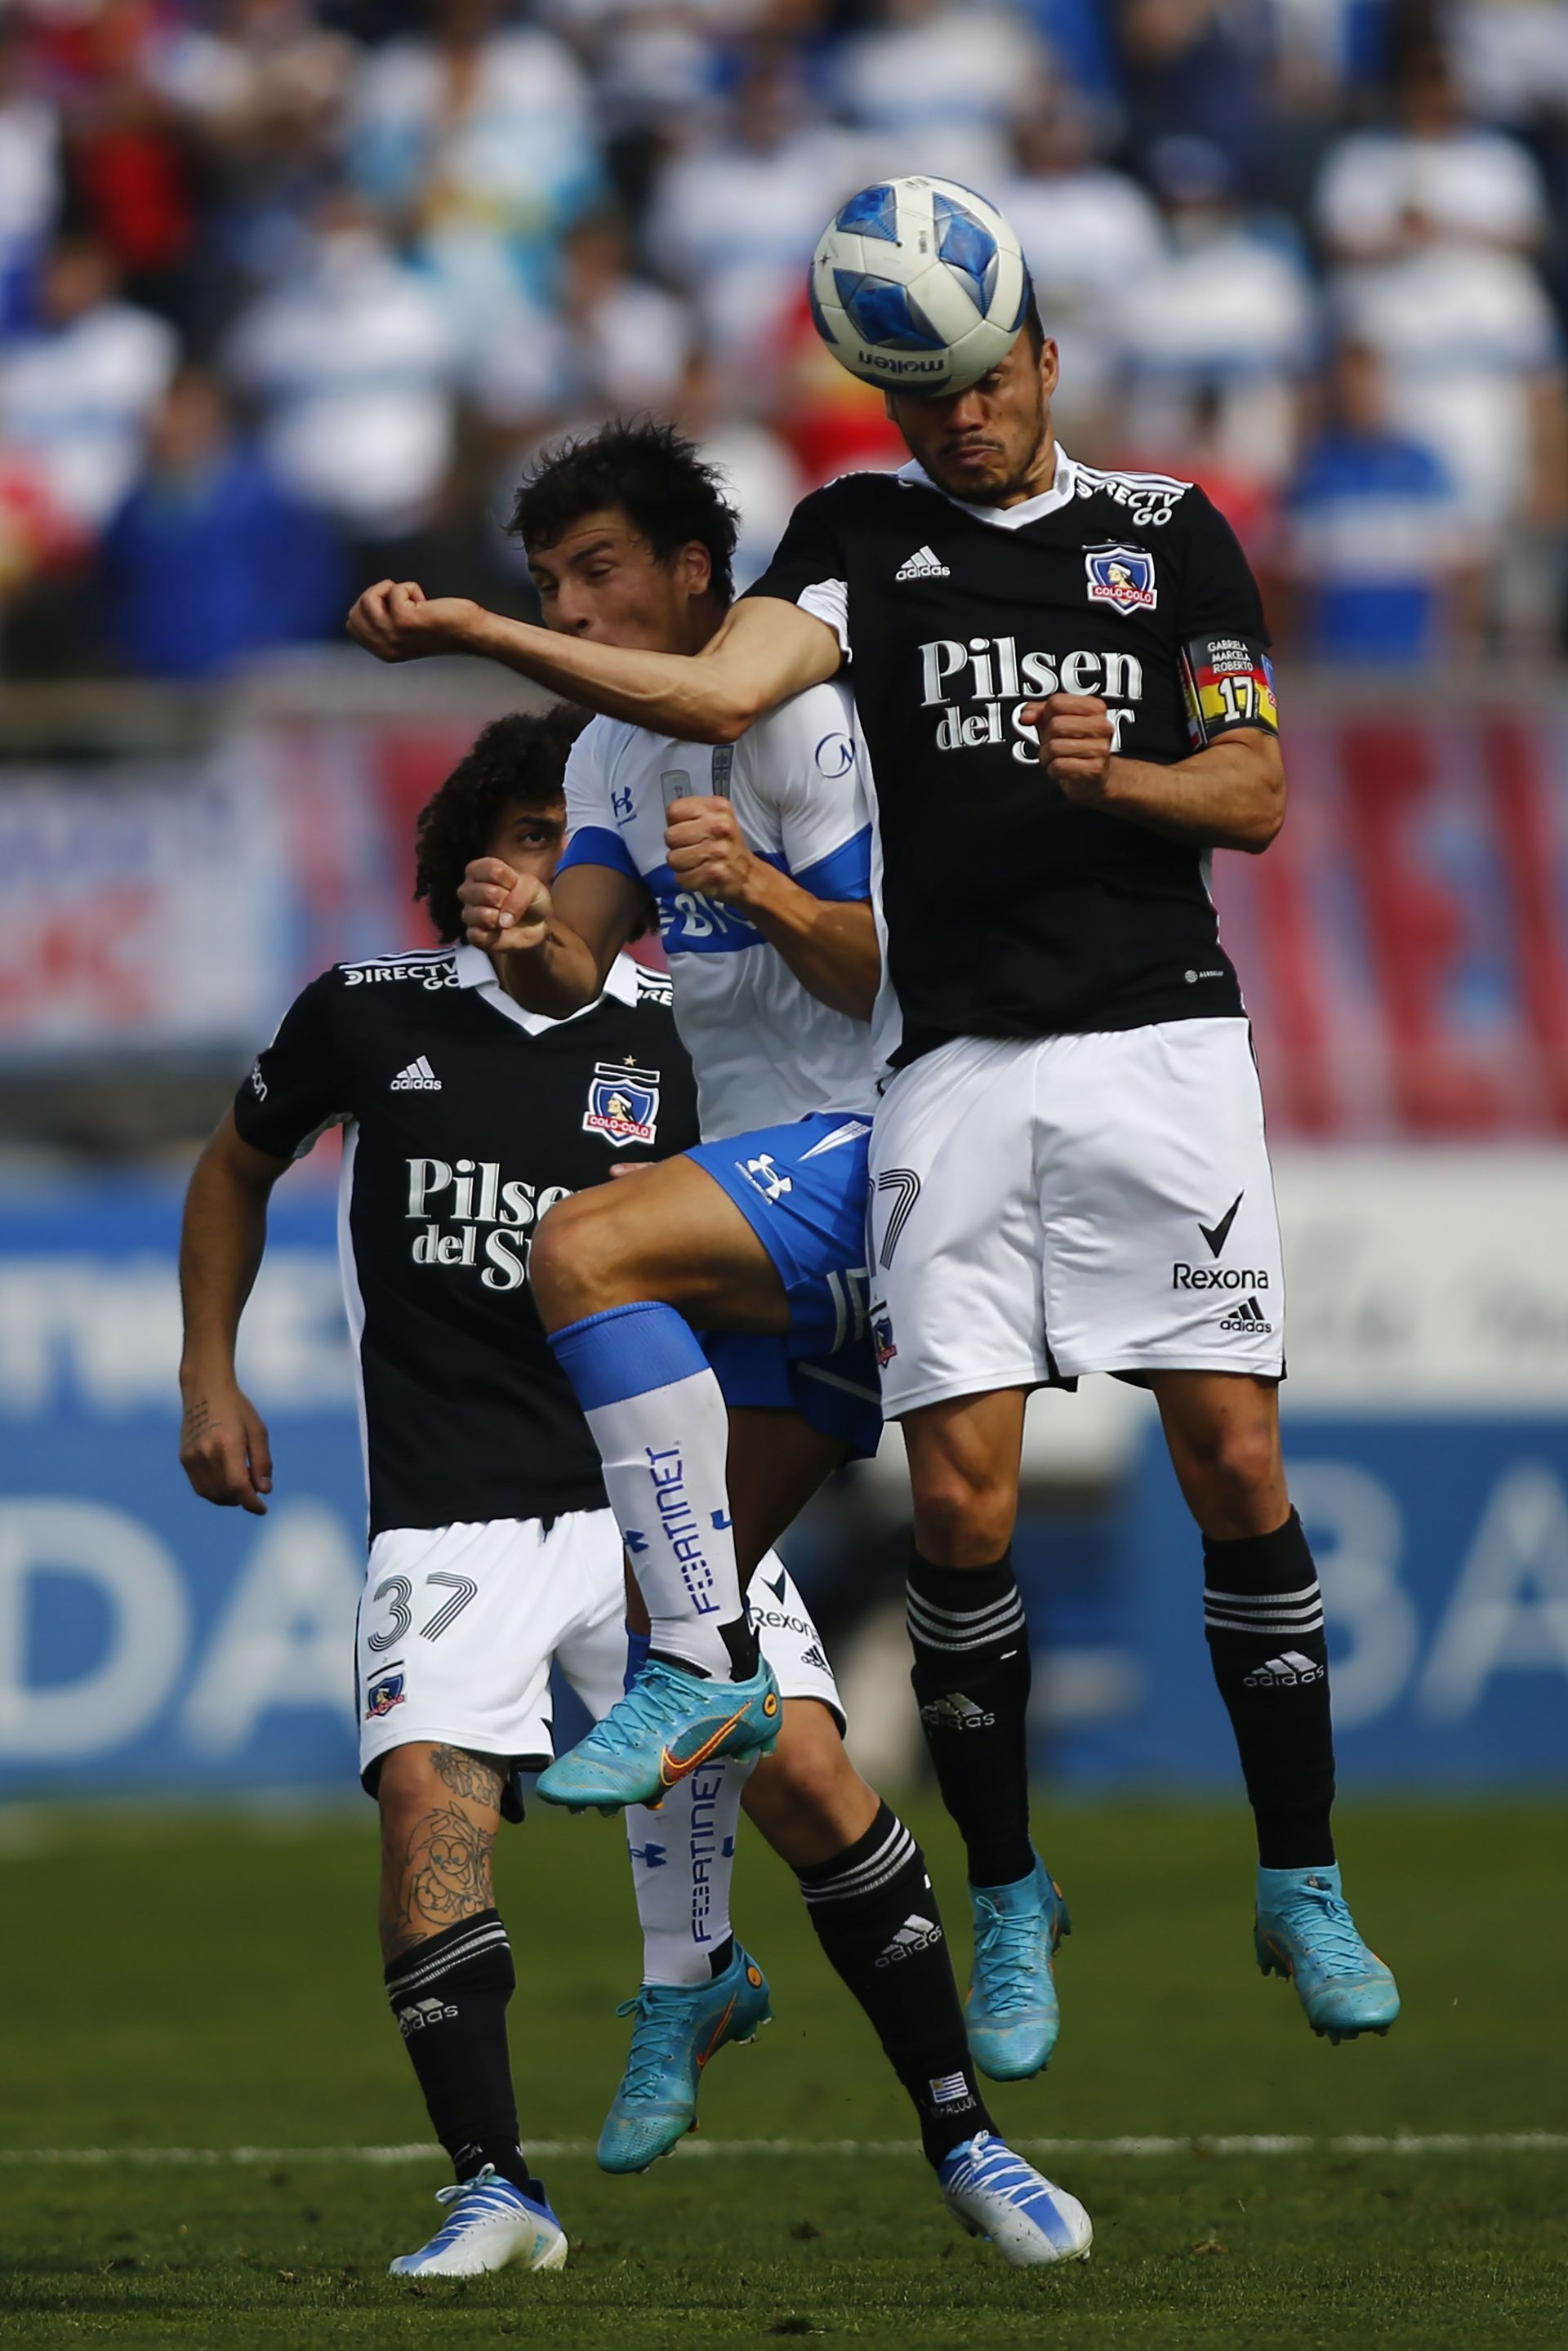 Universidad Catolica will look to do a double over Sporting Cristal as they travel to Peru.